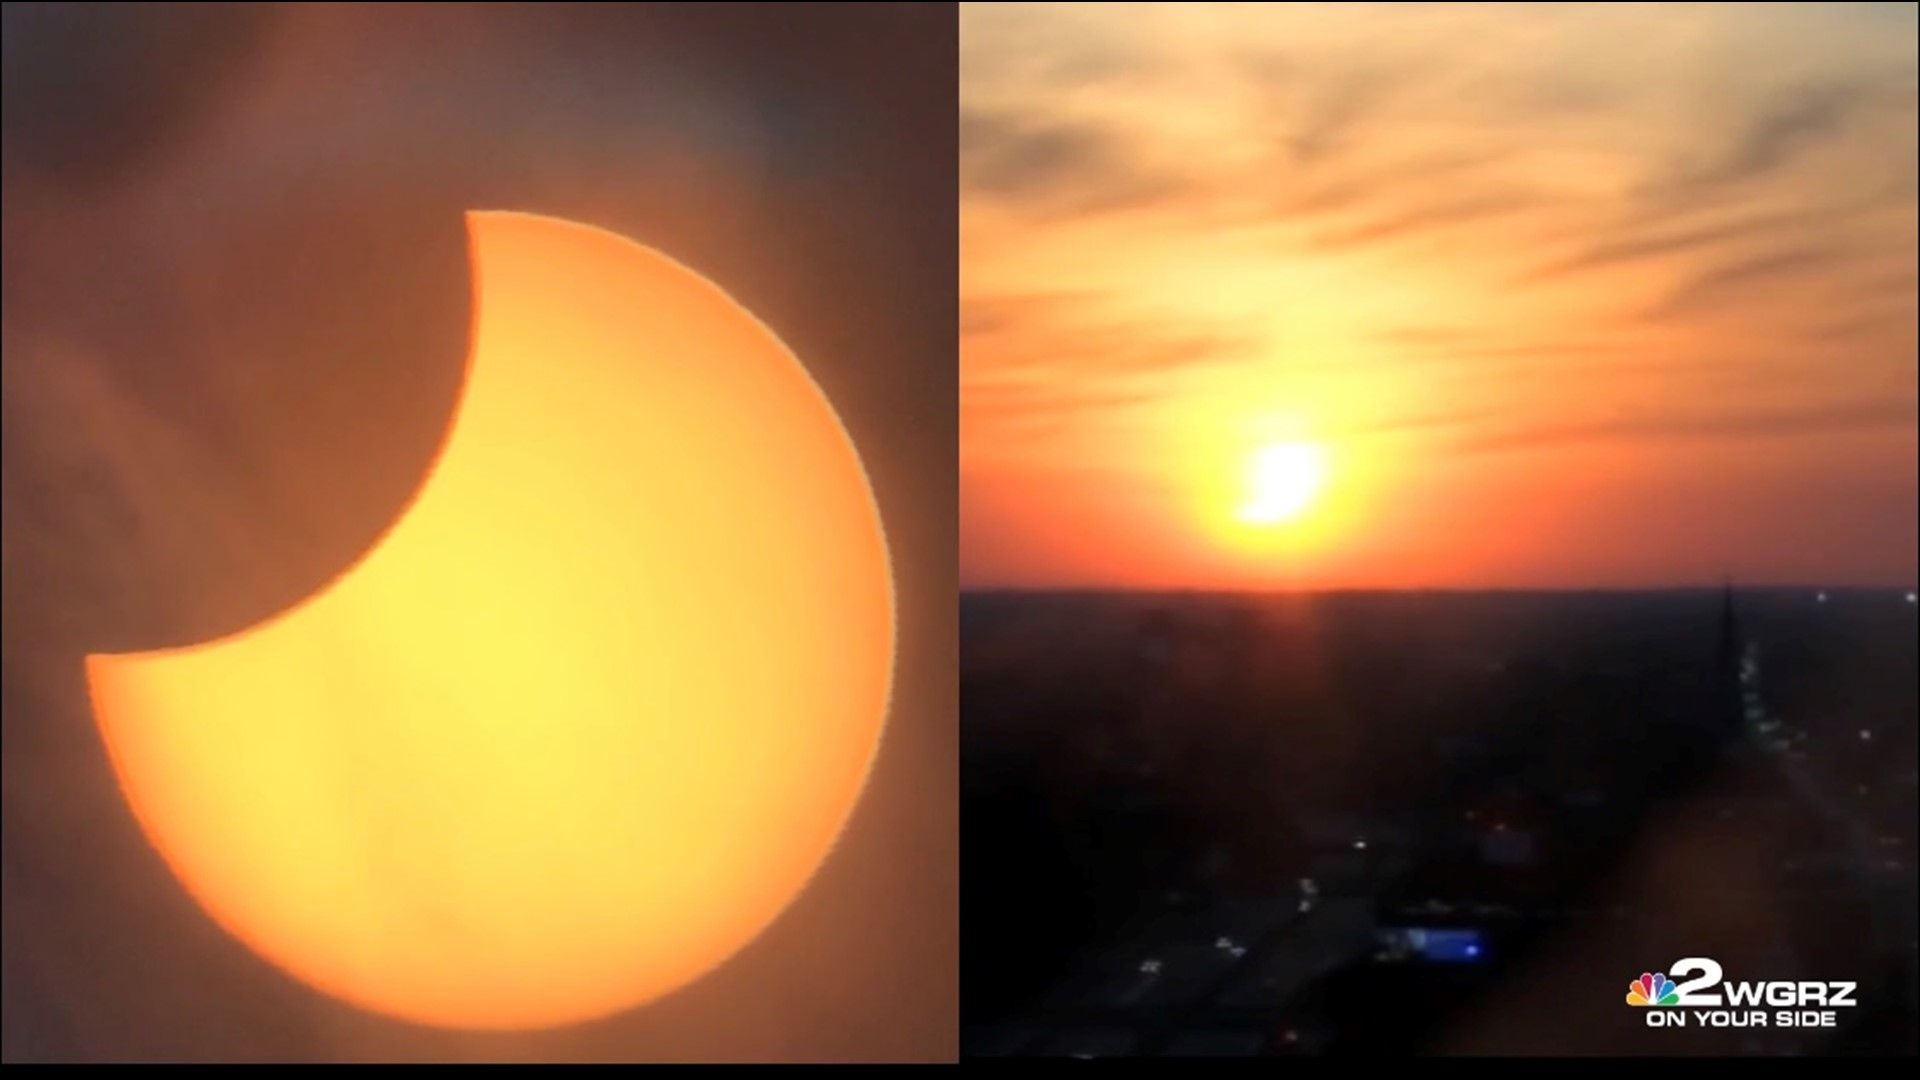 Here's the local peak of the June 10, 2021 solar eclipse over Buffalo.